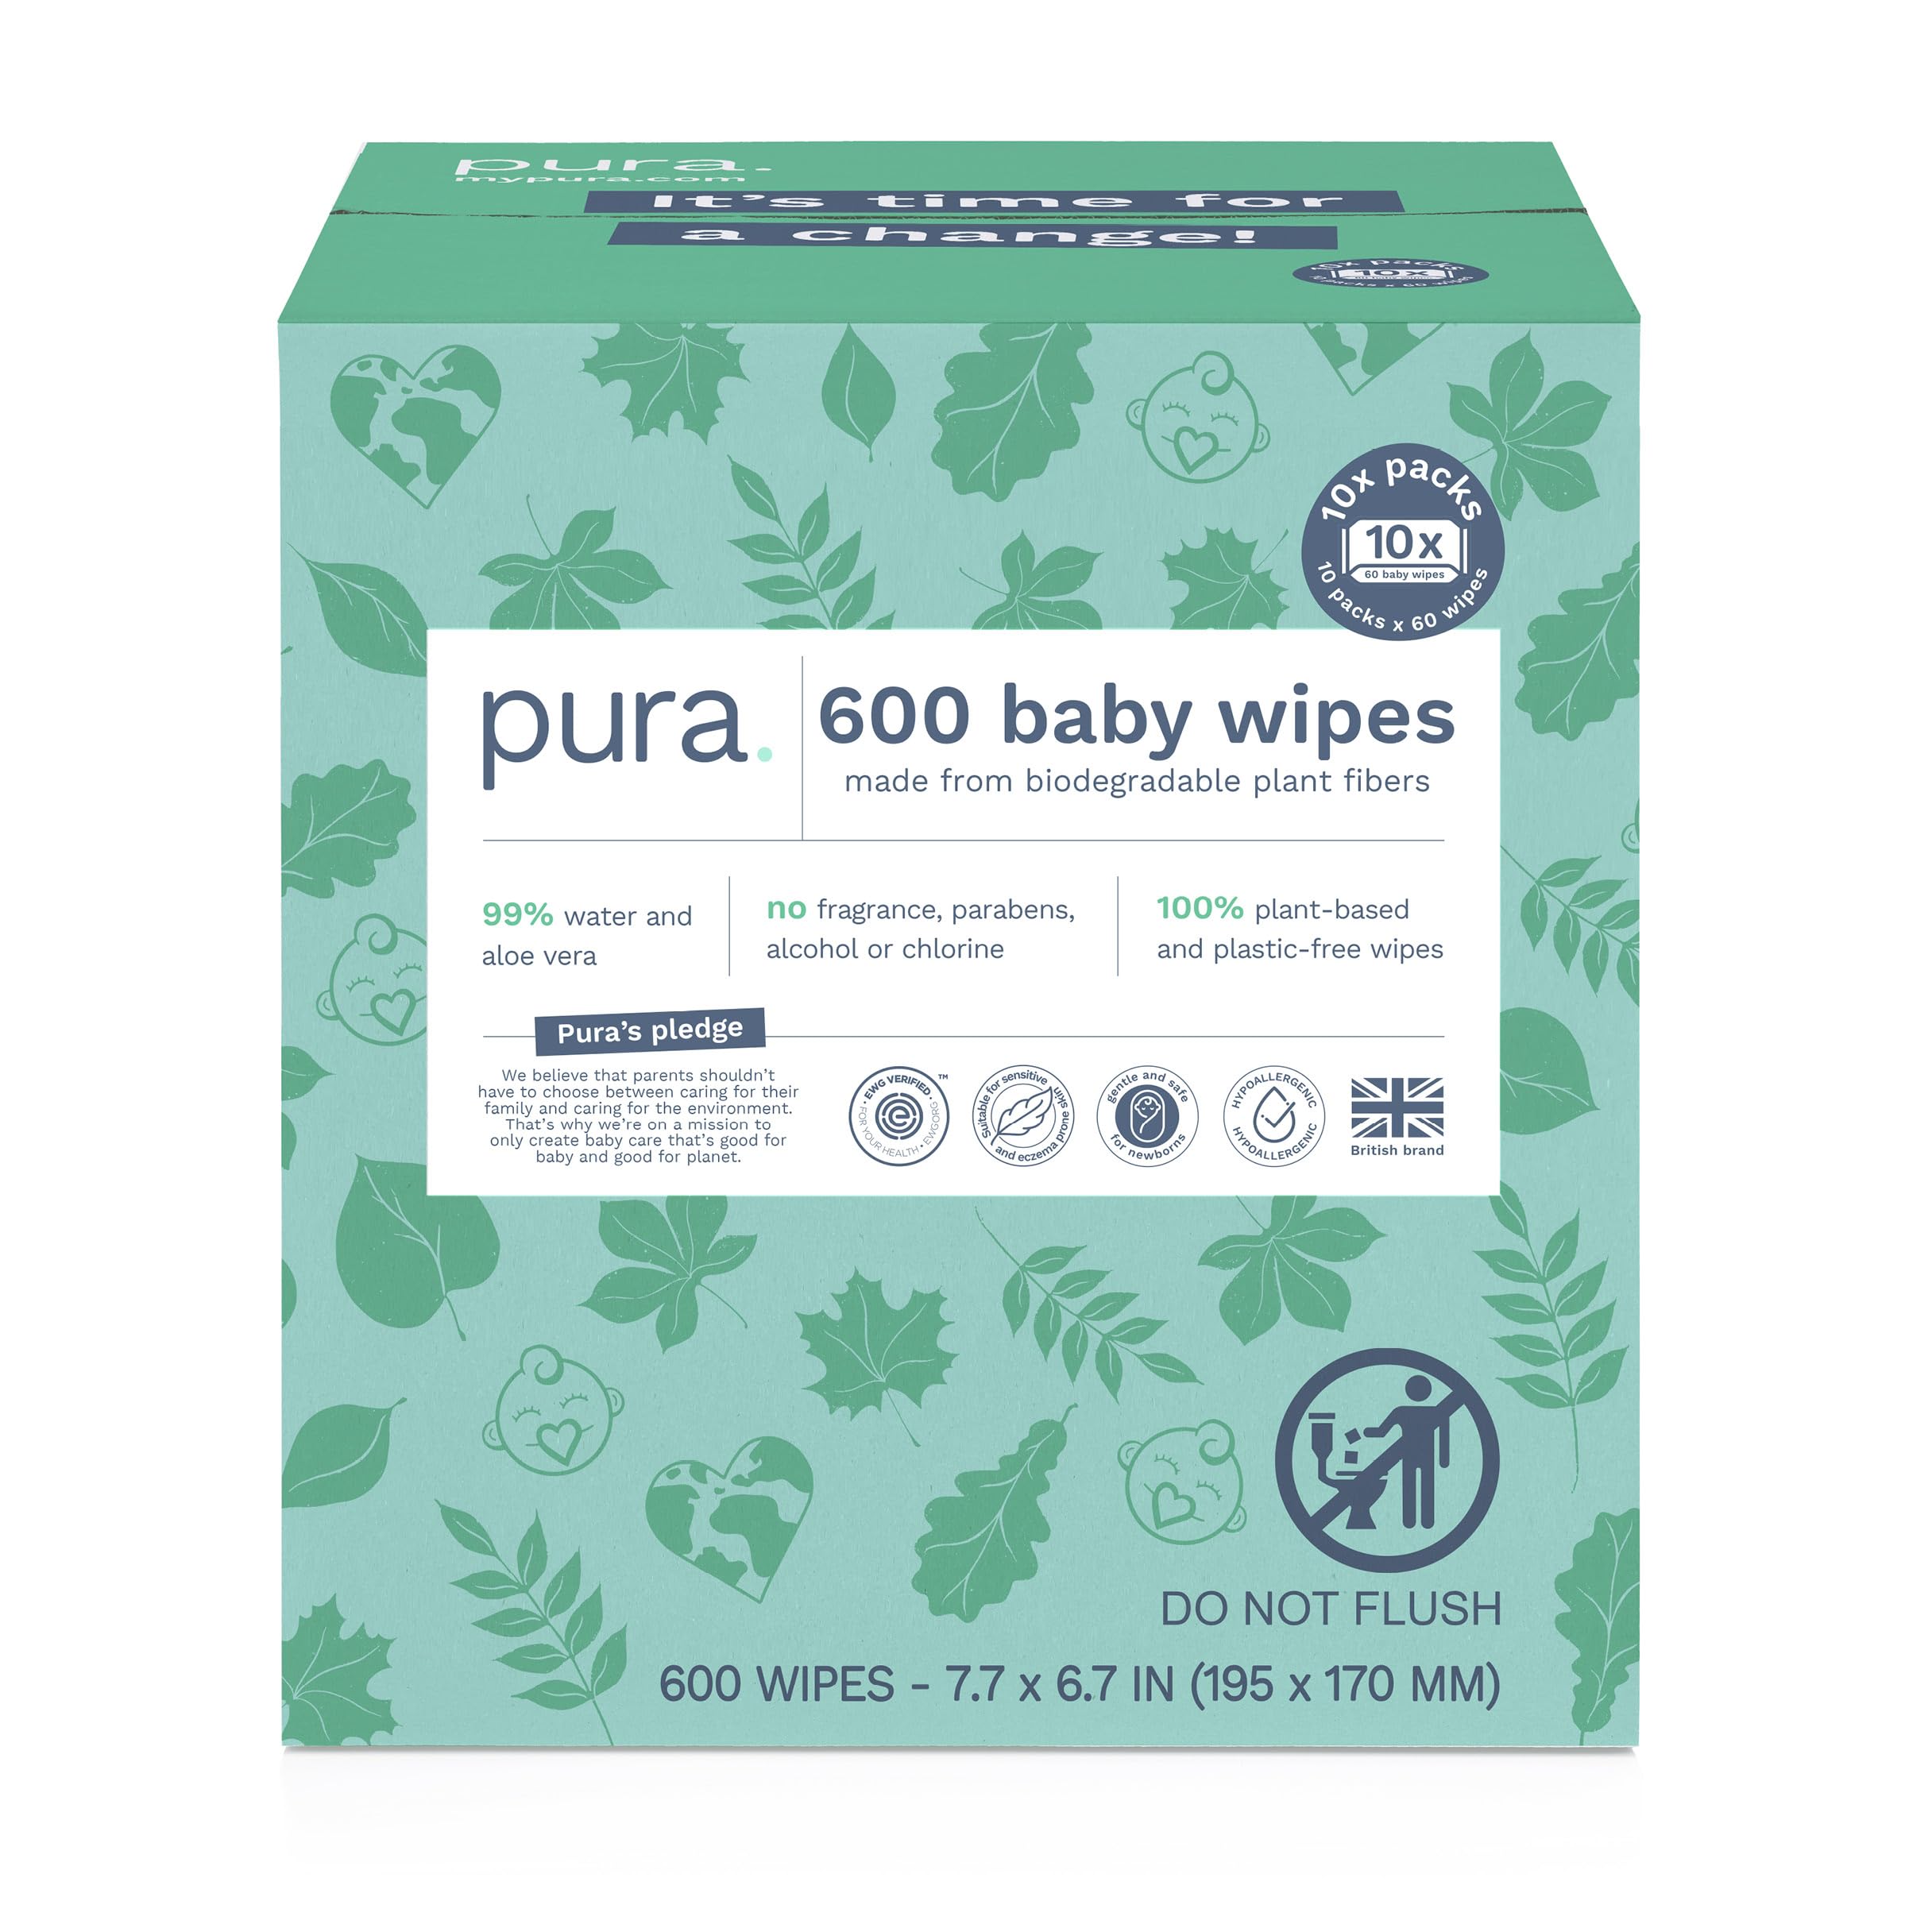 Pura Baby Wipes 10 x 60 Wipes (600 Wipes), 100% Plastic-Free & Plant Based Wipes, 99% Water, Suitable for Sensitive & Eczema-prone Skin, Fragrance Free & Hypoallergenic, EWG, Cruelty Free